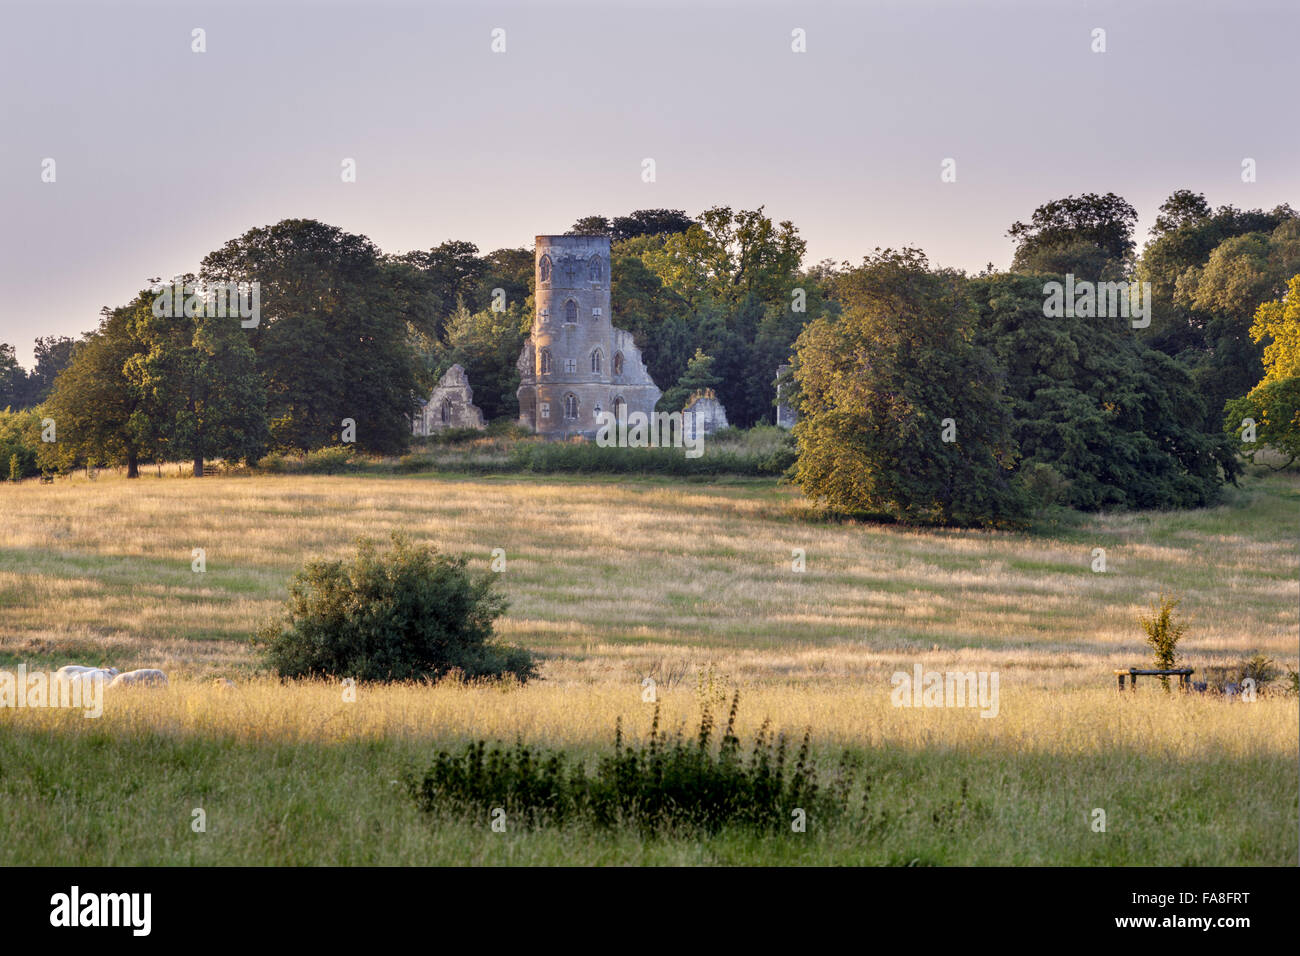 The Gothic Tower on Johnson's Hill on the Wimpole Estate, Cambridgeshire. The Tower was built in 1774 to the designs of James Essex, based on the original plans twenty five years earlier by Sanderson Miller. Stock Photo